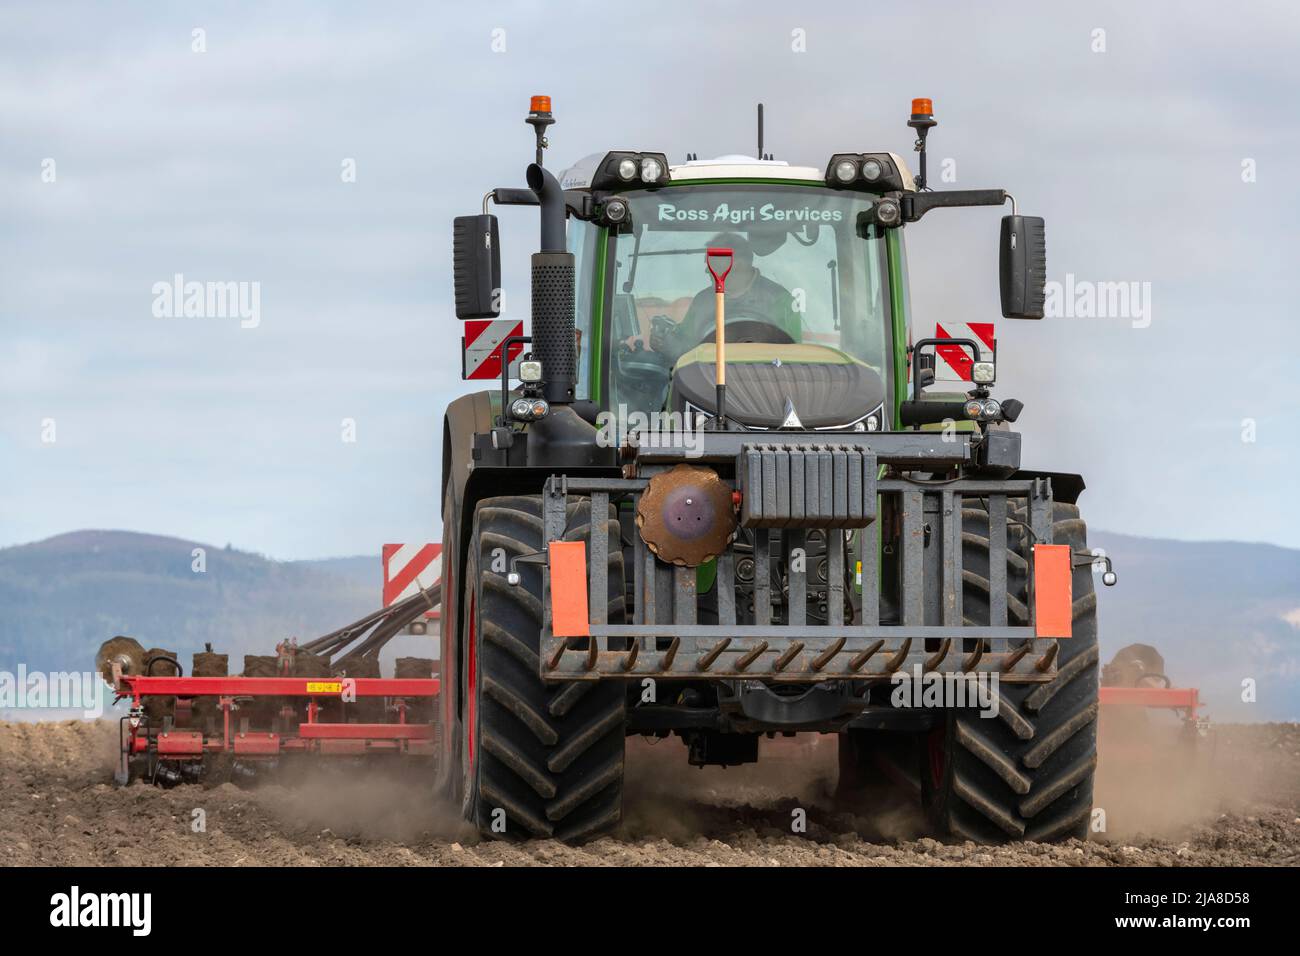 A Front View of a Farmer in a Fendt Tractor Pulling a Disc Seed Drill in a Field in Spring Stock Photo